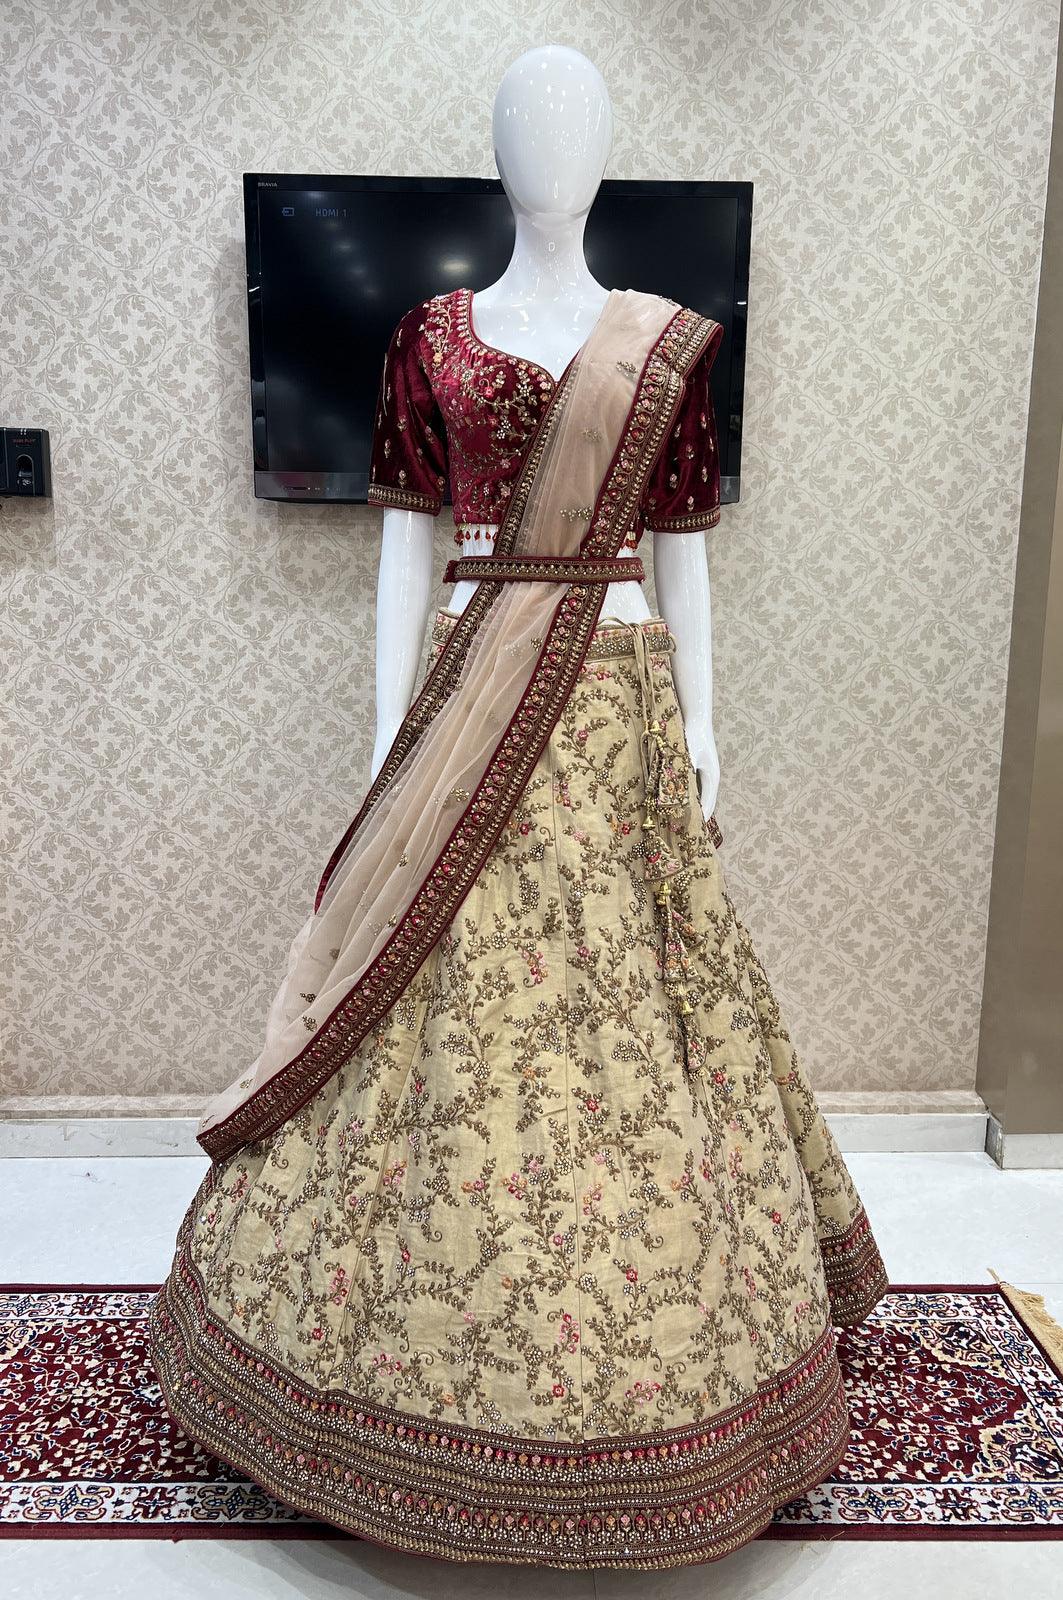 Thoughts on this look ? Personally feel the lehenga and jewellery are  amazing but the entire look is not sangeet appropriate and would be more  appropriate for the actual wedding ceremony :